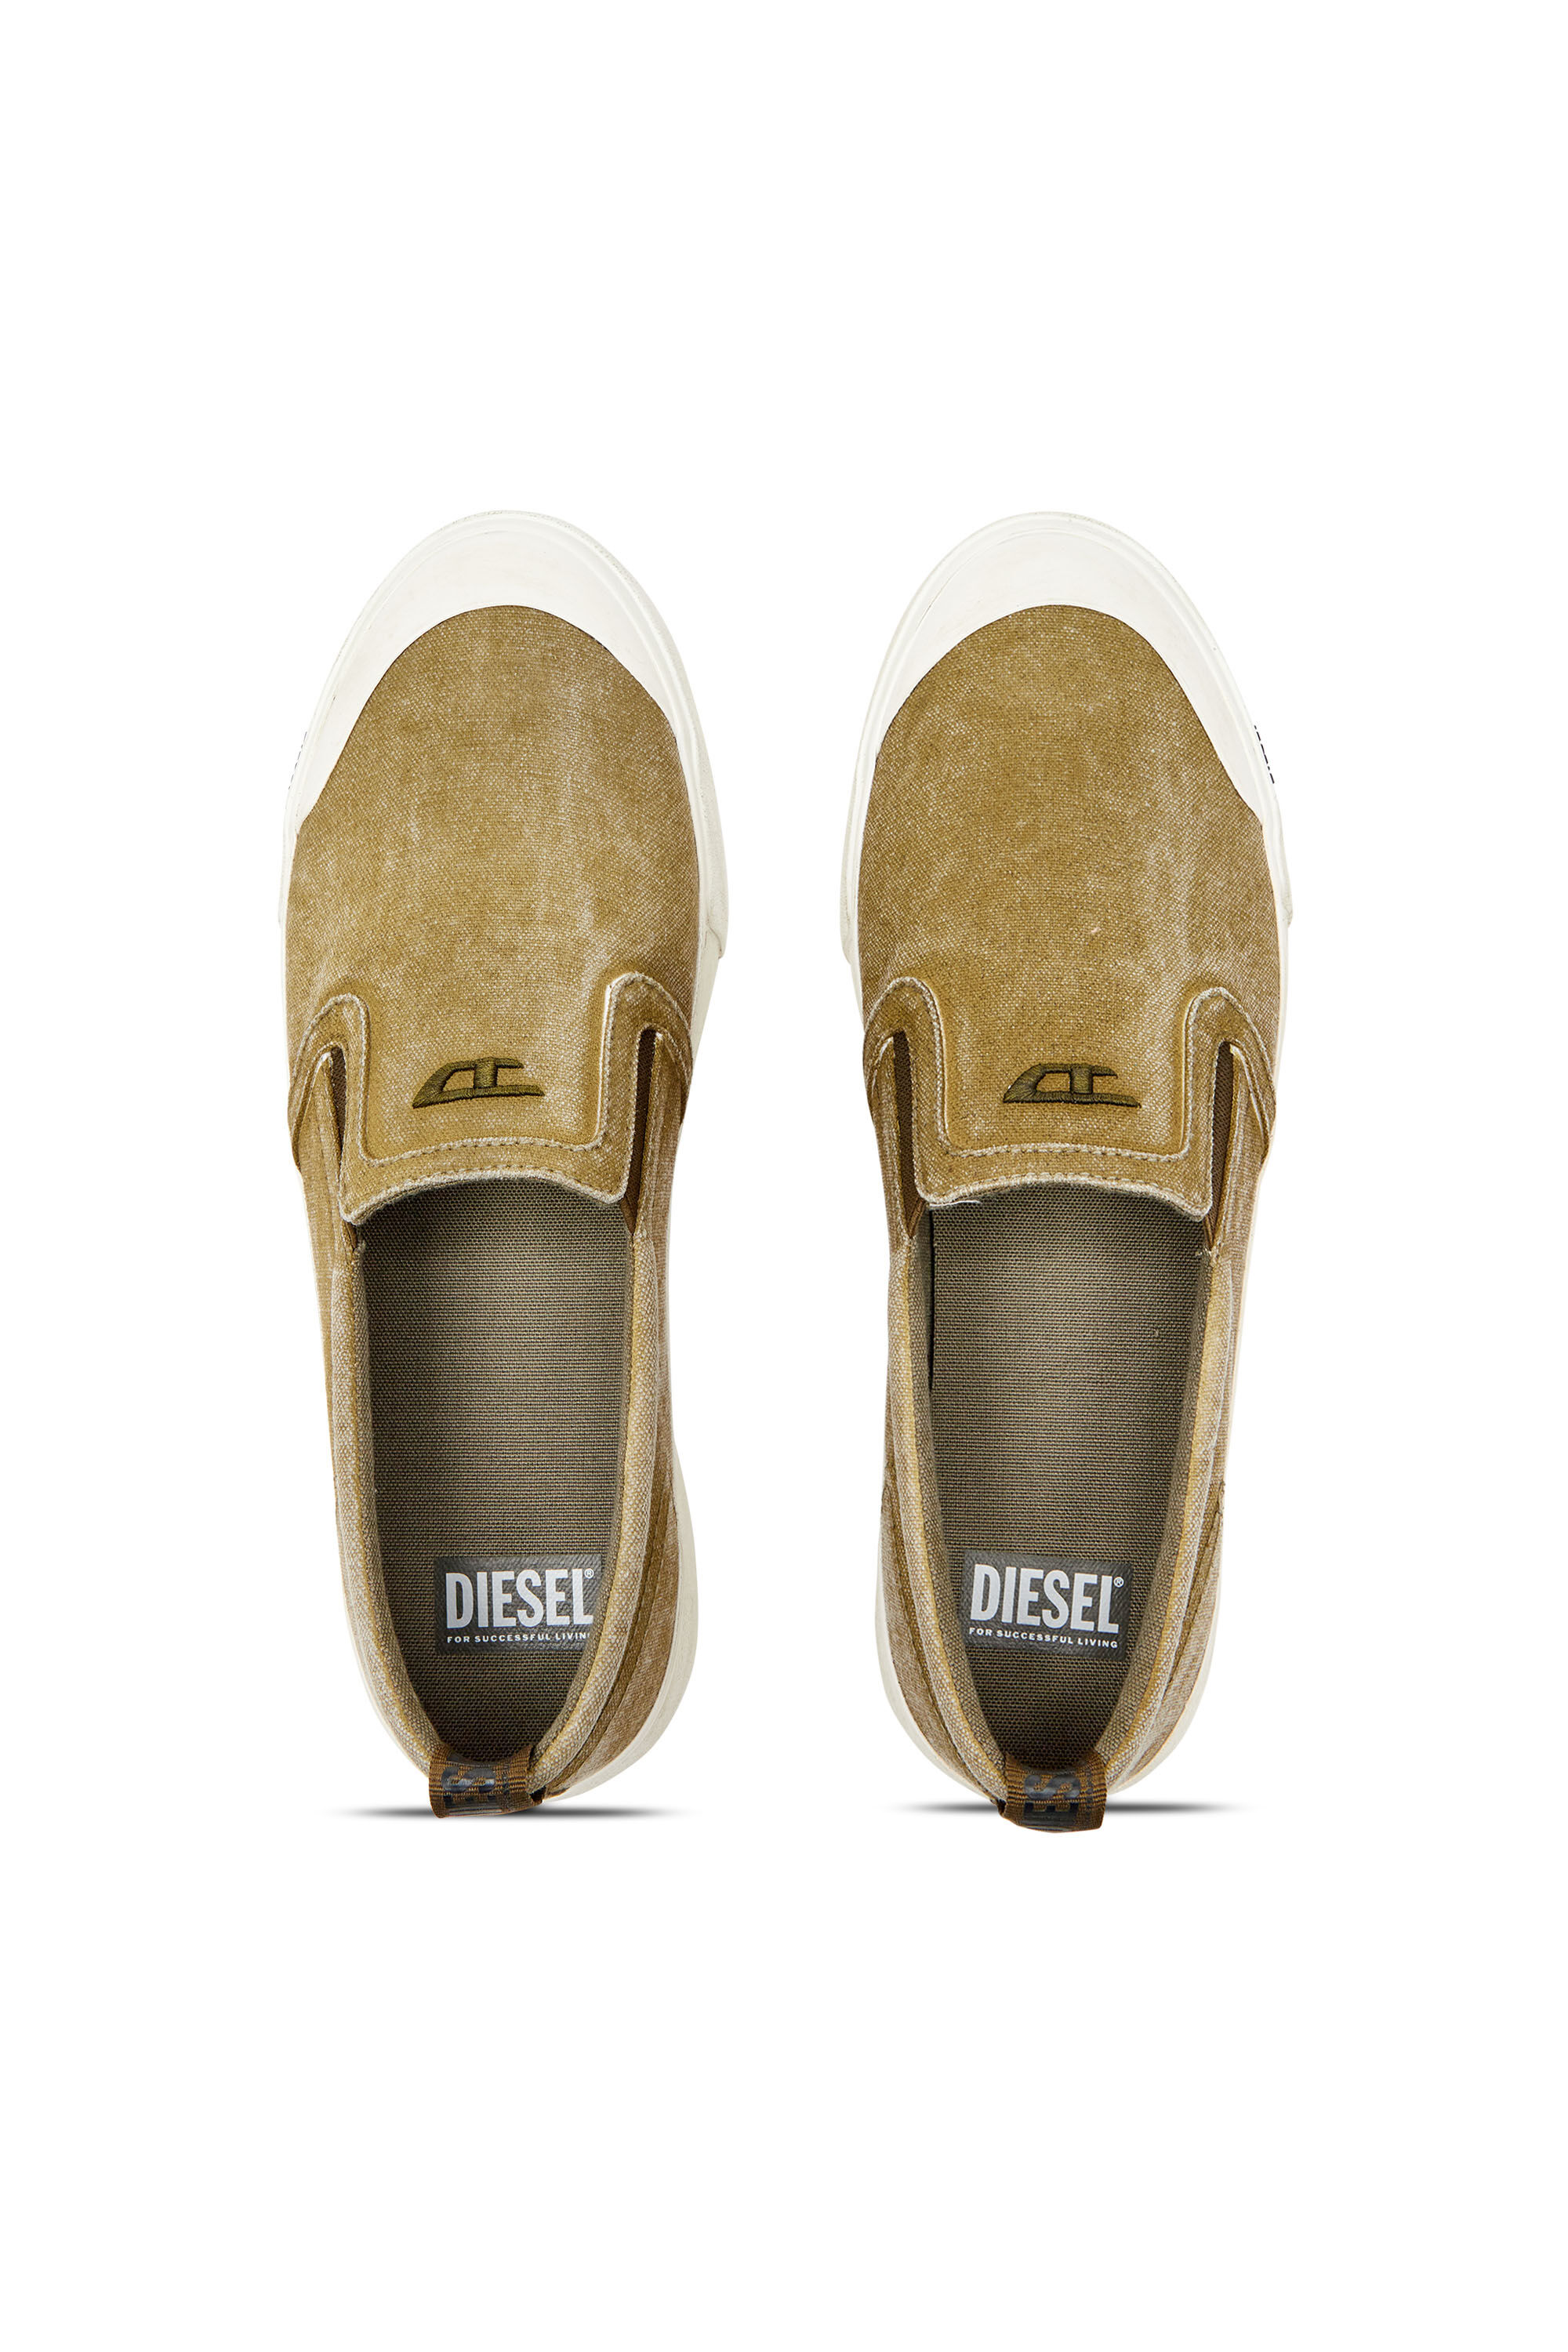 Diesel - S-ATHOS SLIP ON, Man Canvas slip-on sneakers with D embroidery in Brown - Image 4